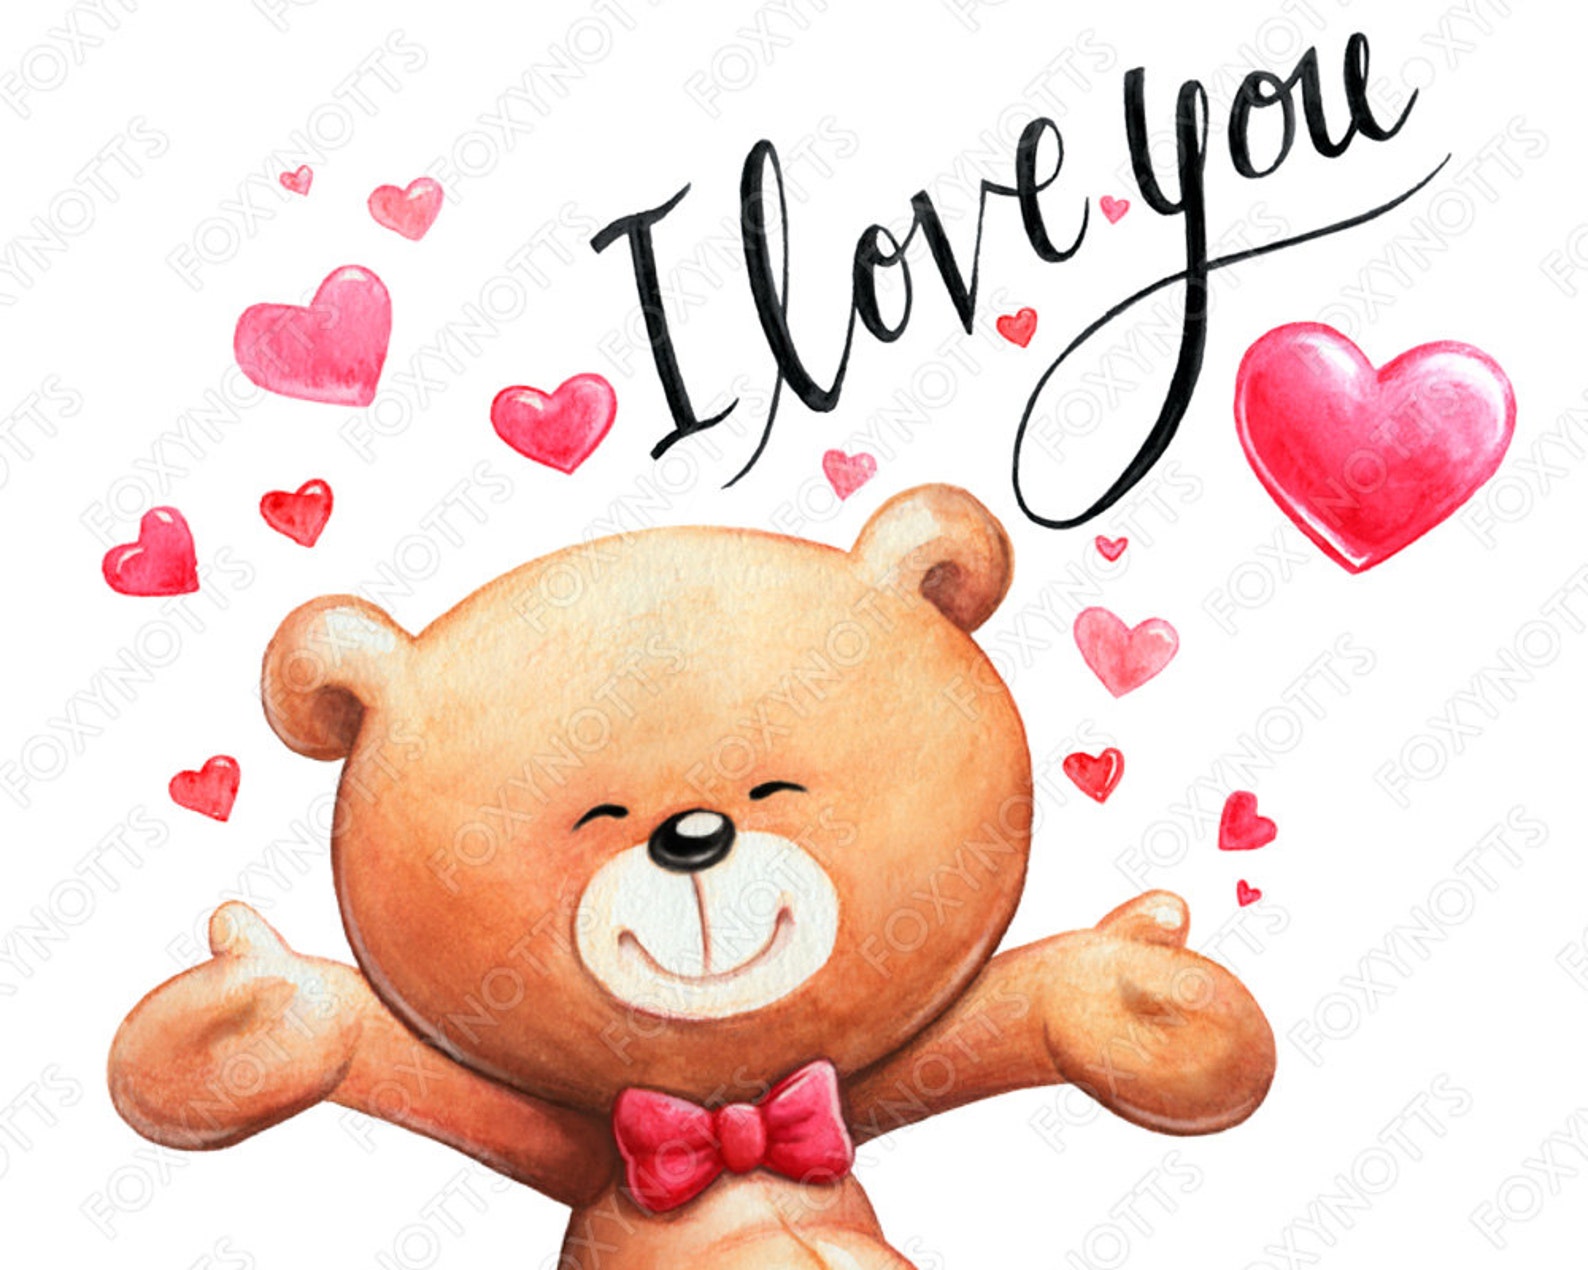 Teddy Bear Clip Art With Hearts and 'I Love You' Watercolor Digital Download High Resolution